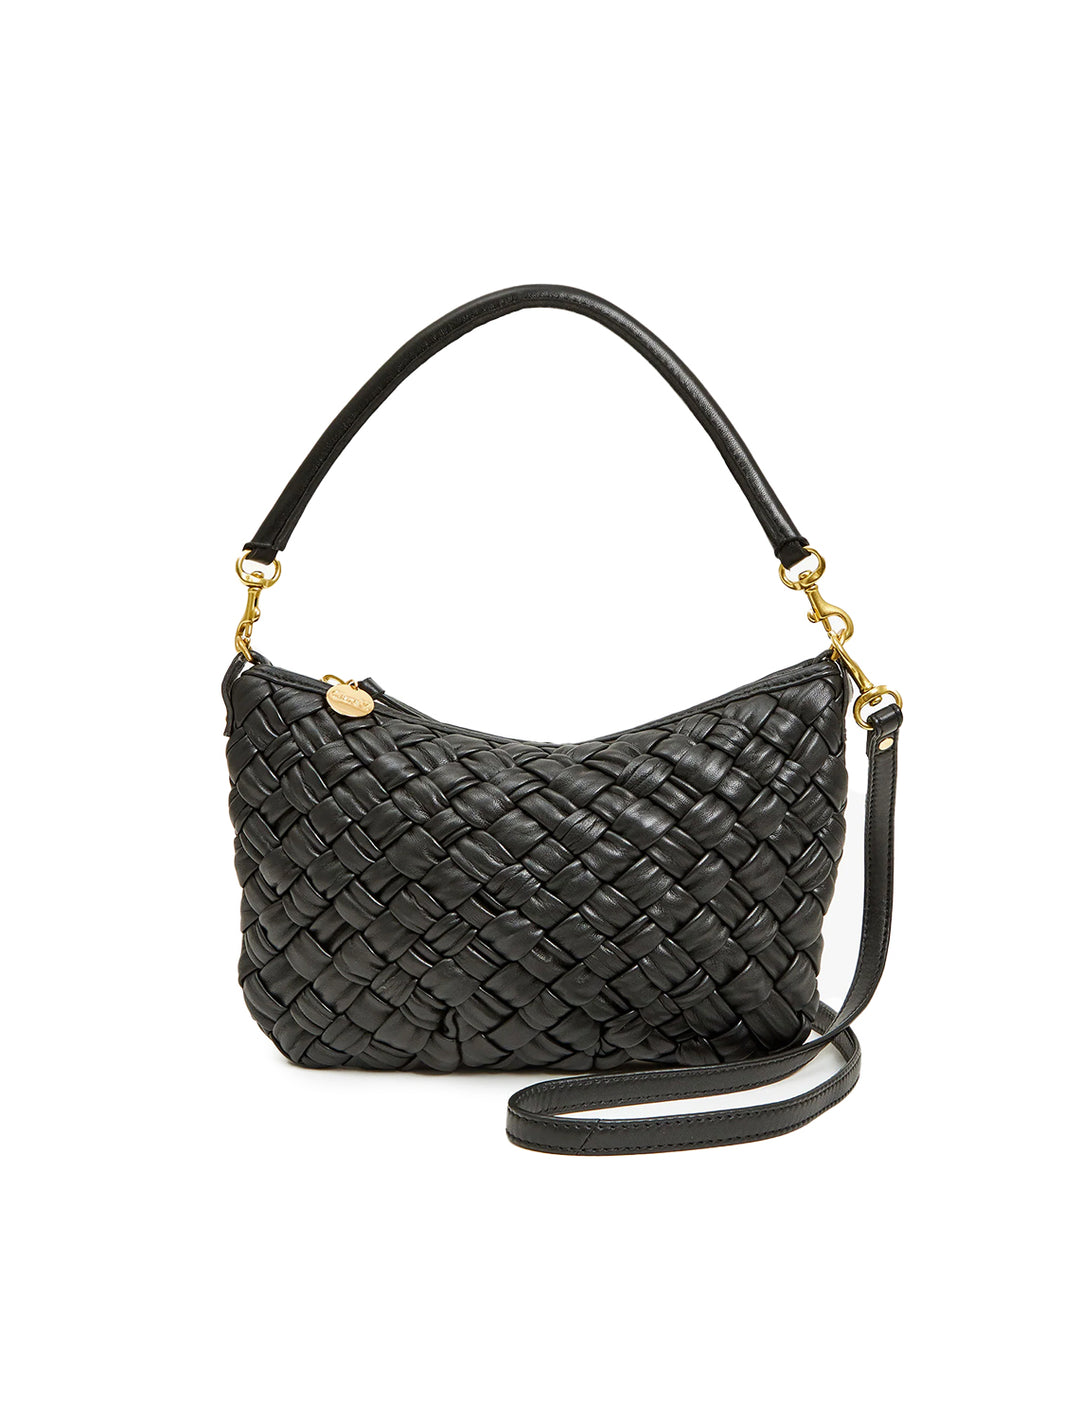 Front view of Clare V.'s petite moyen messenger in black puffy woven.